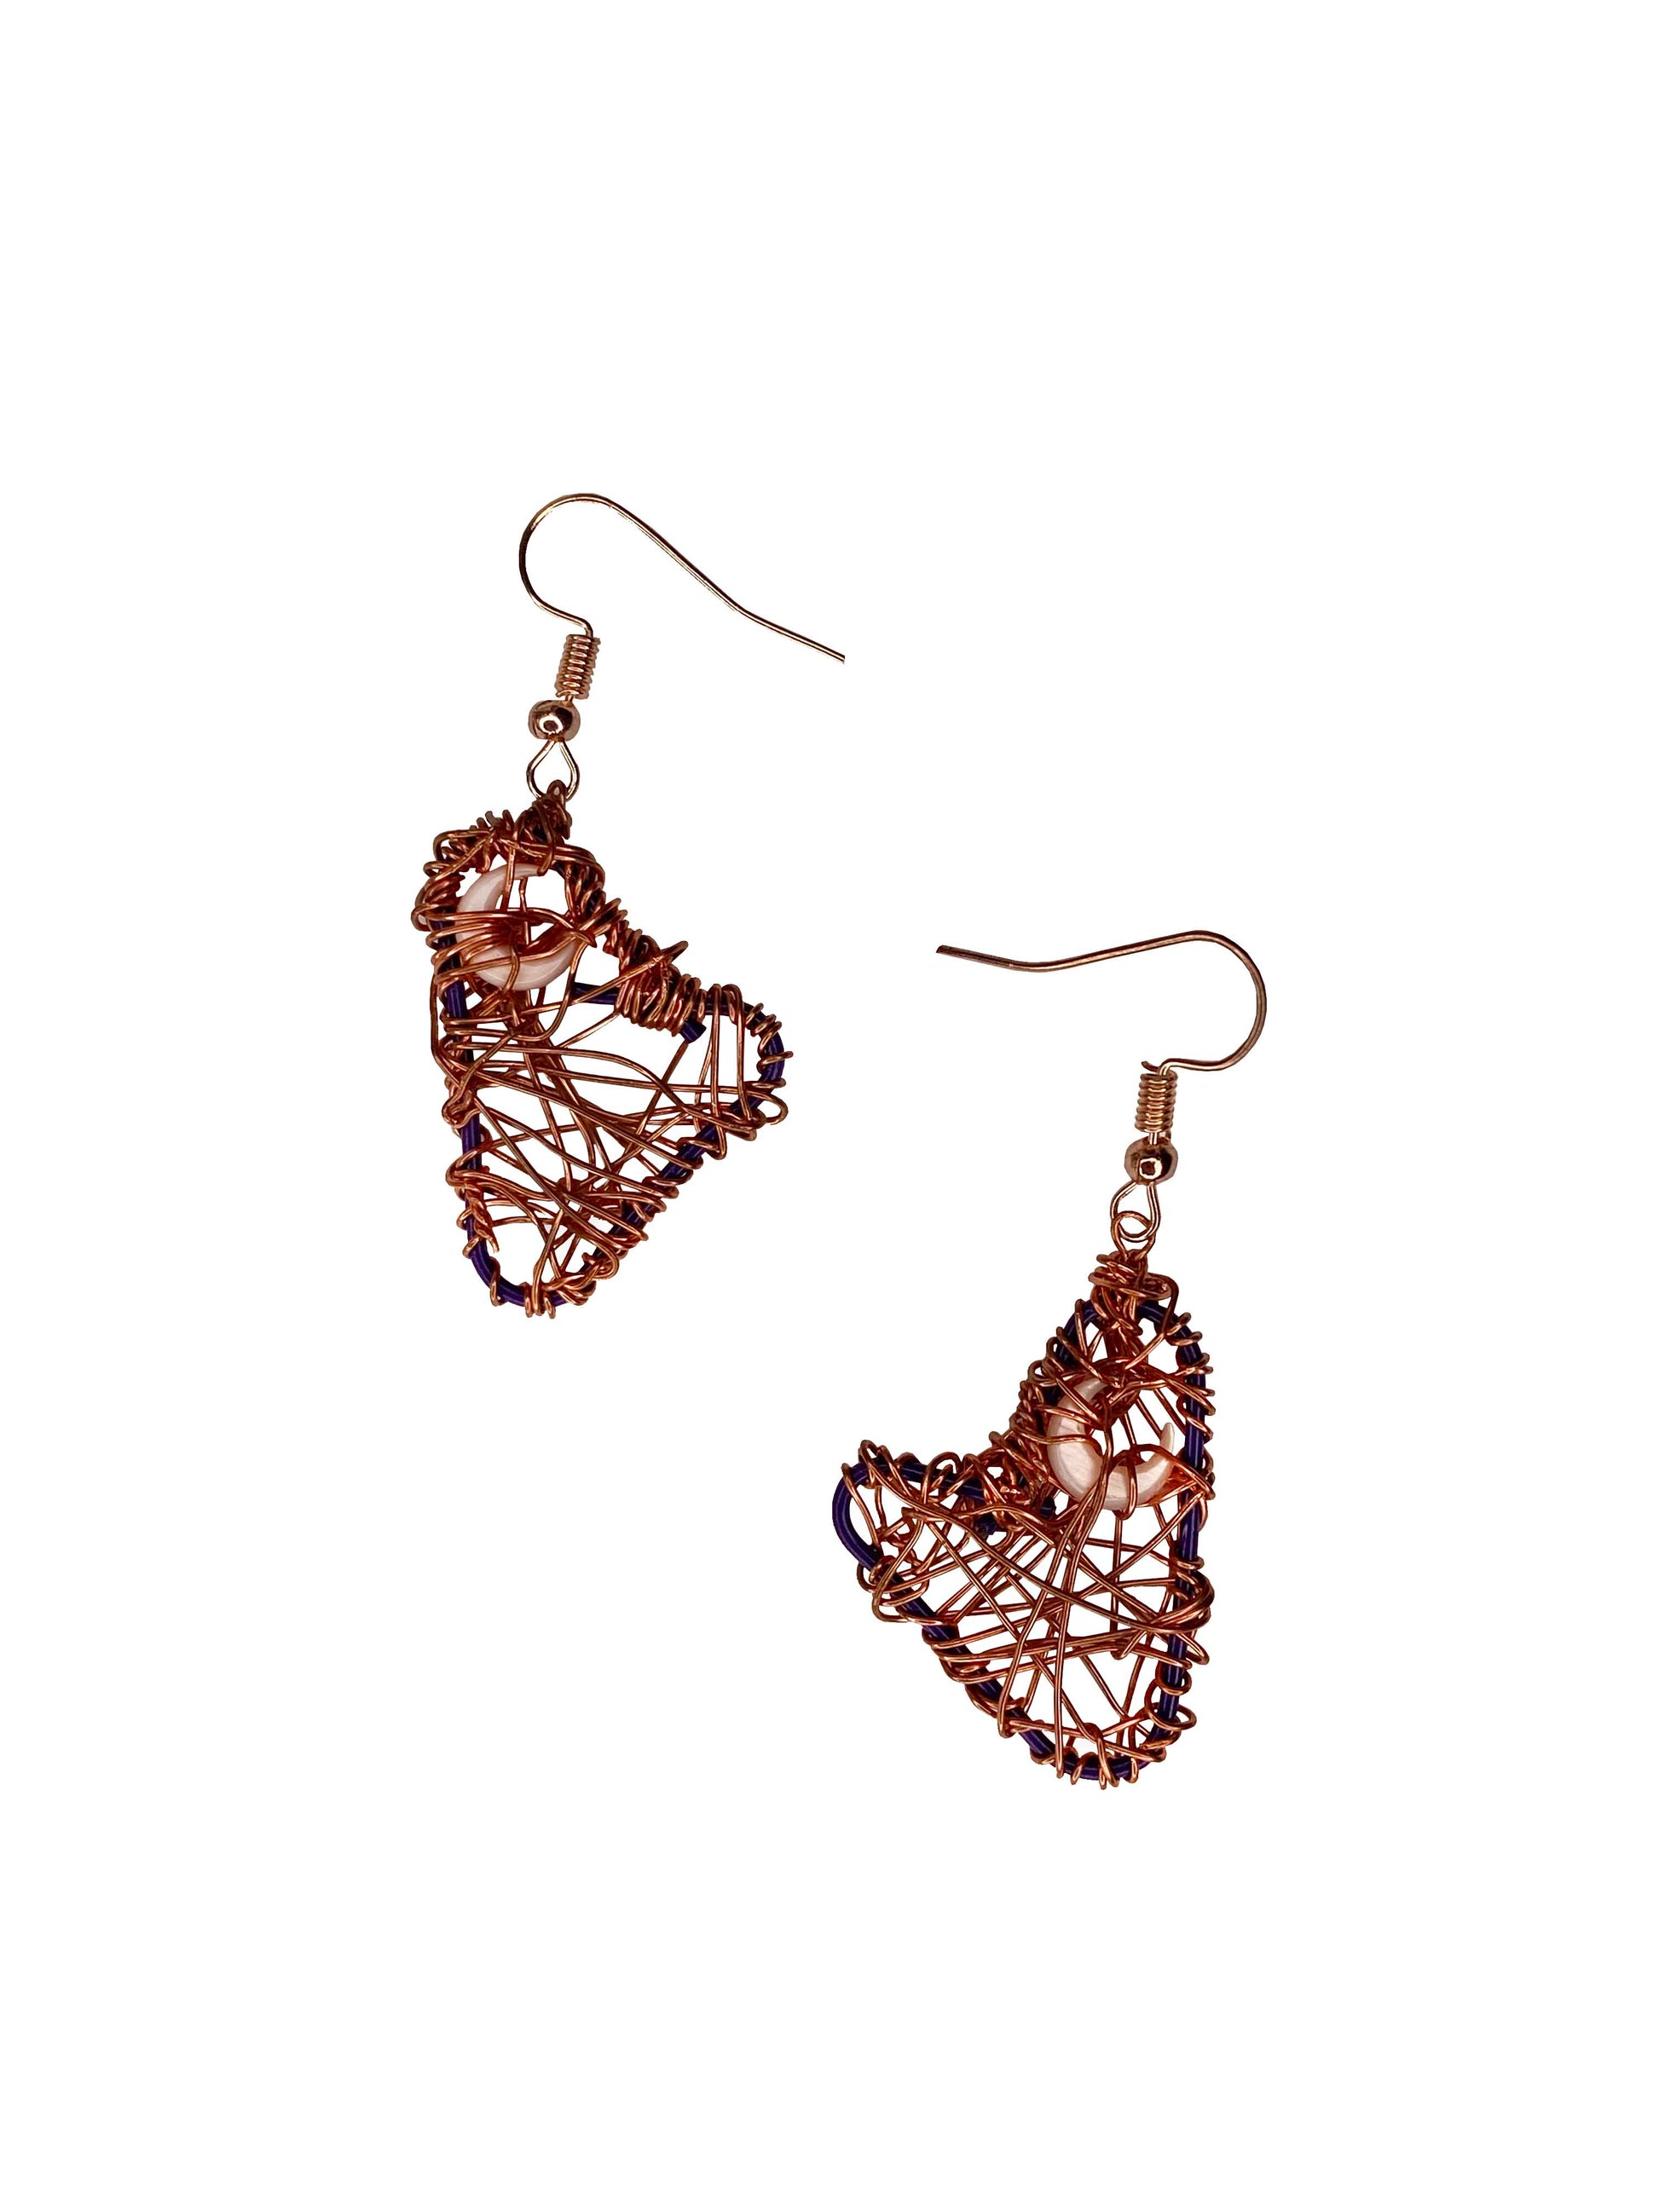 A pair of handmade copper wire wrapped crescent moon earrings. 